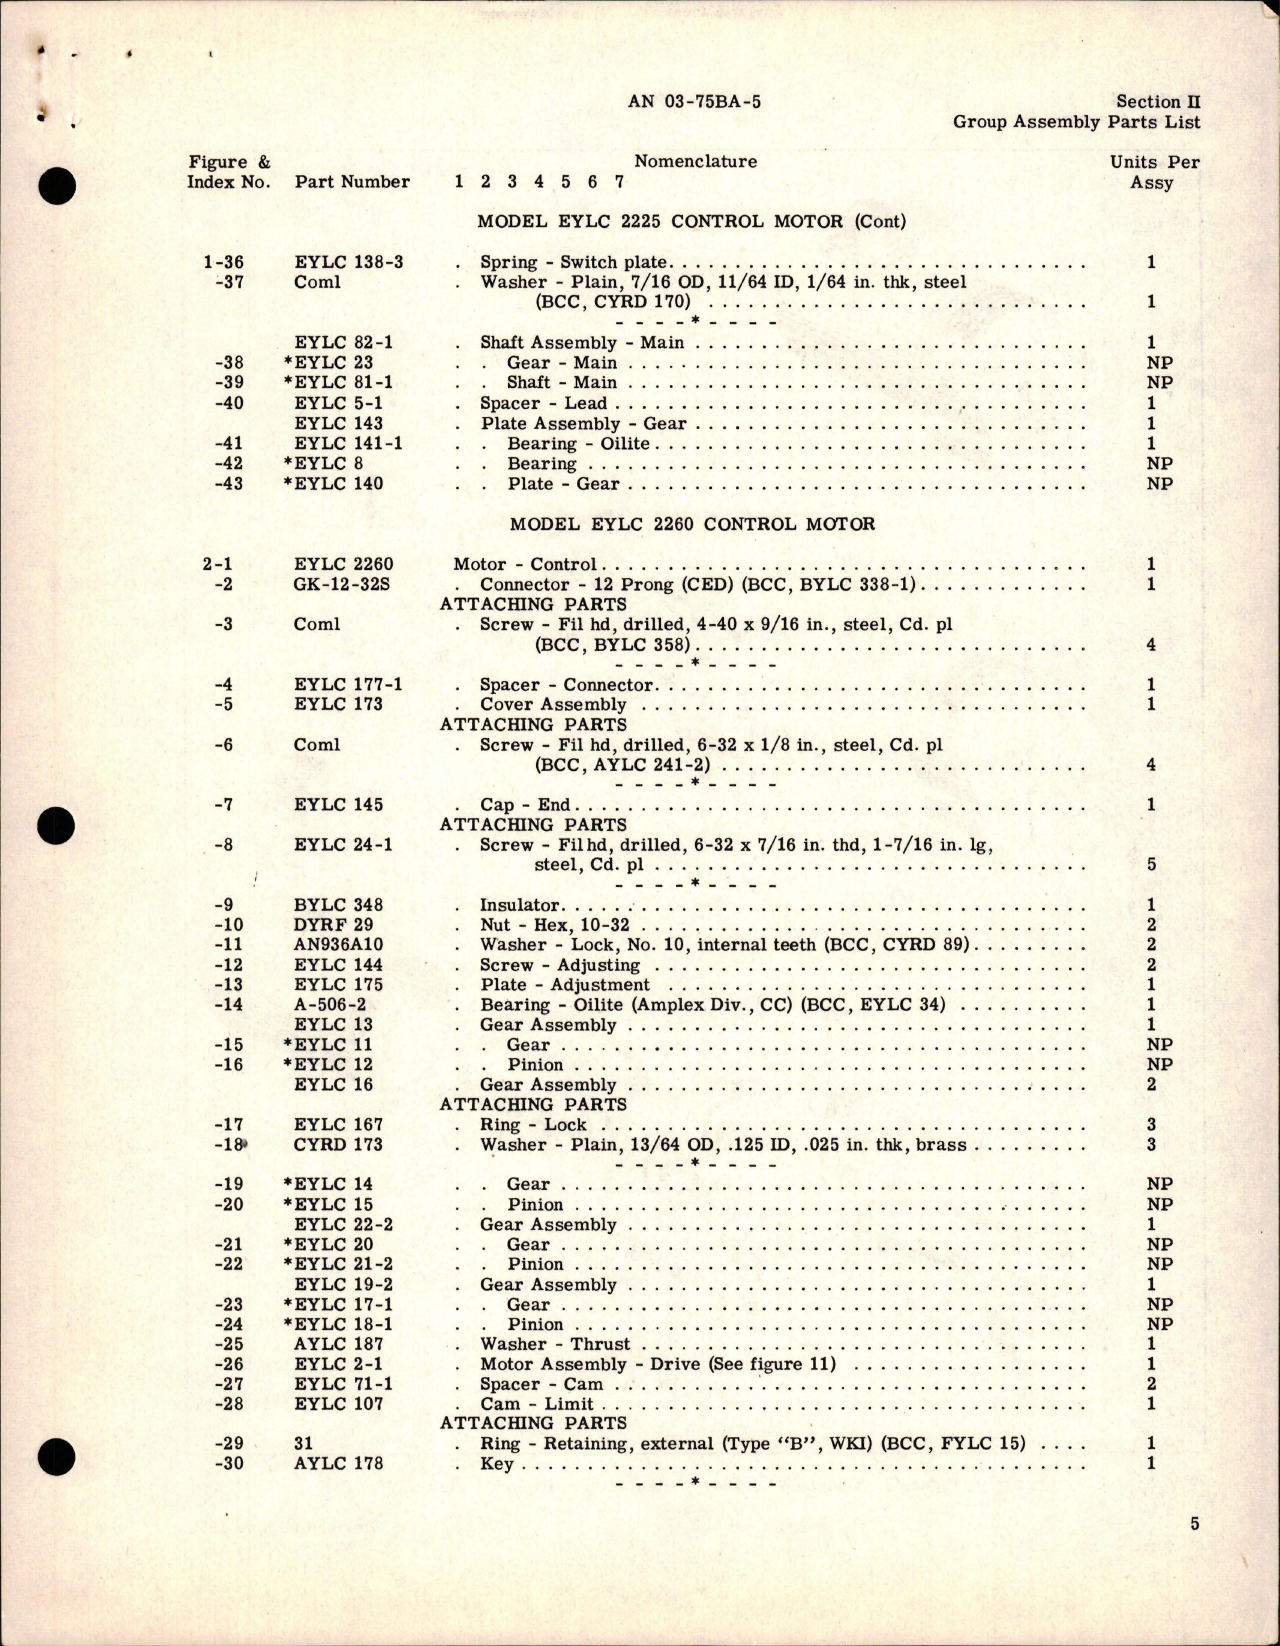 Sample page 5 from AirCorps Library document: Parts Catalog for Control Motors - Part EYLC Series 